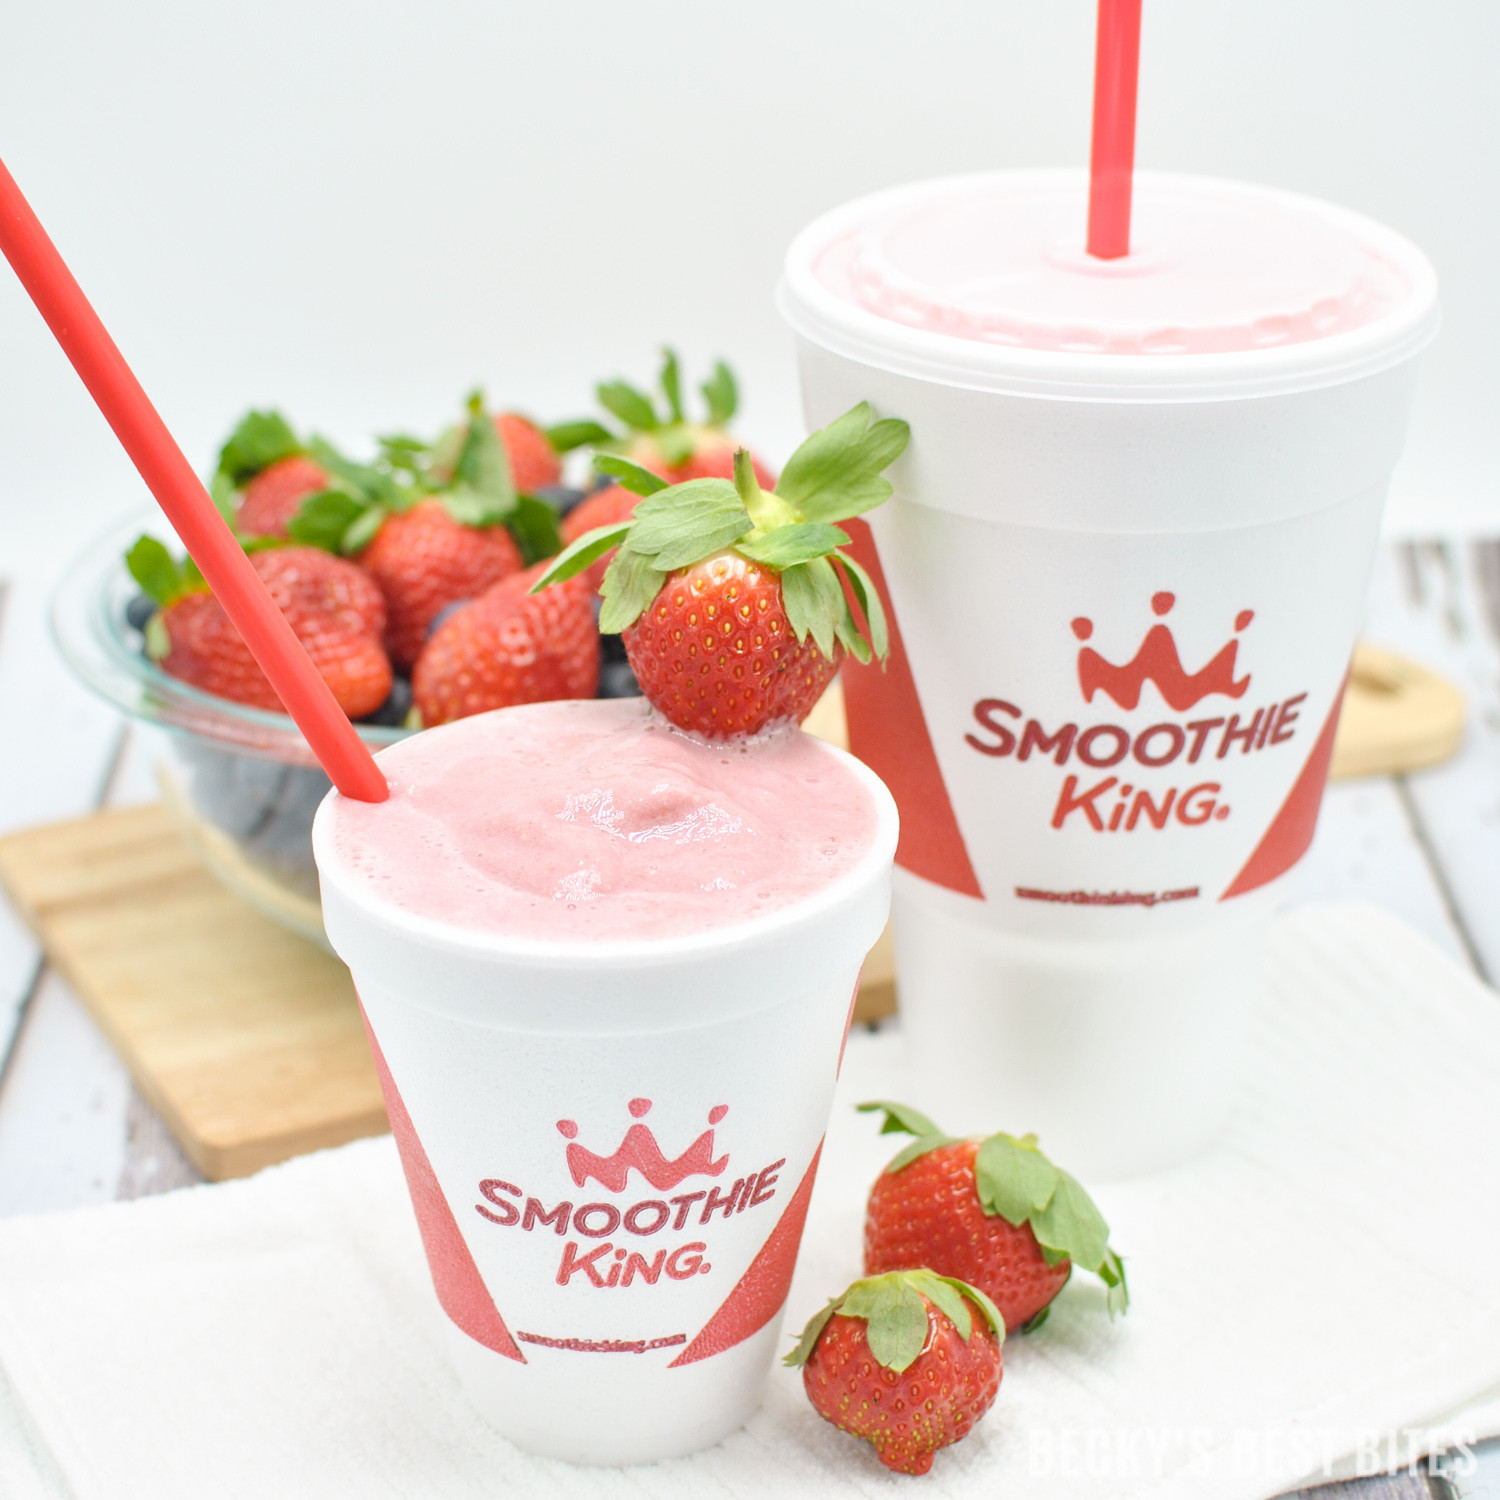 Smoothie King Recipes
 Change A Meal Challenge with Smoothie King